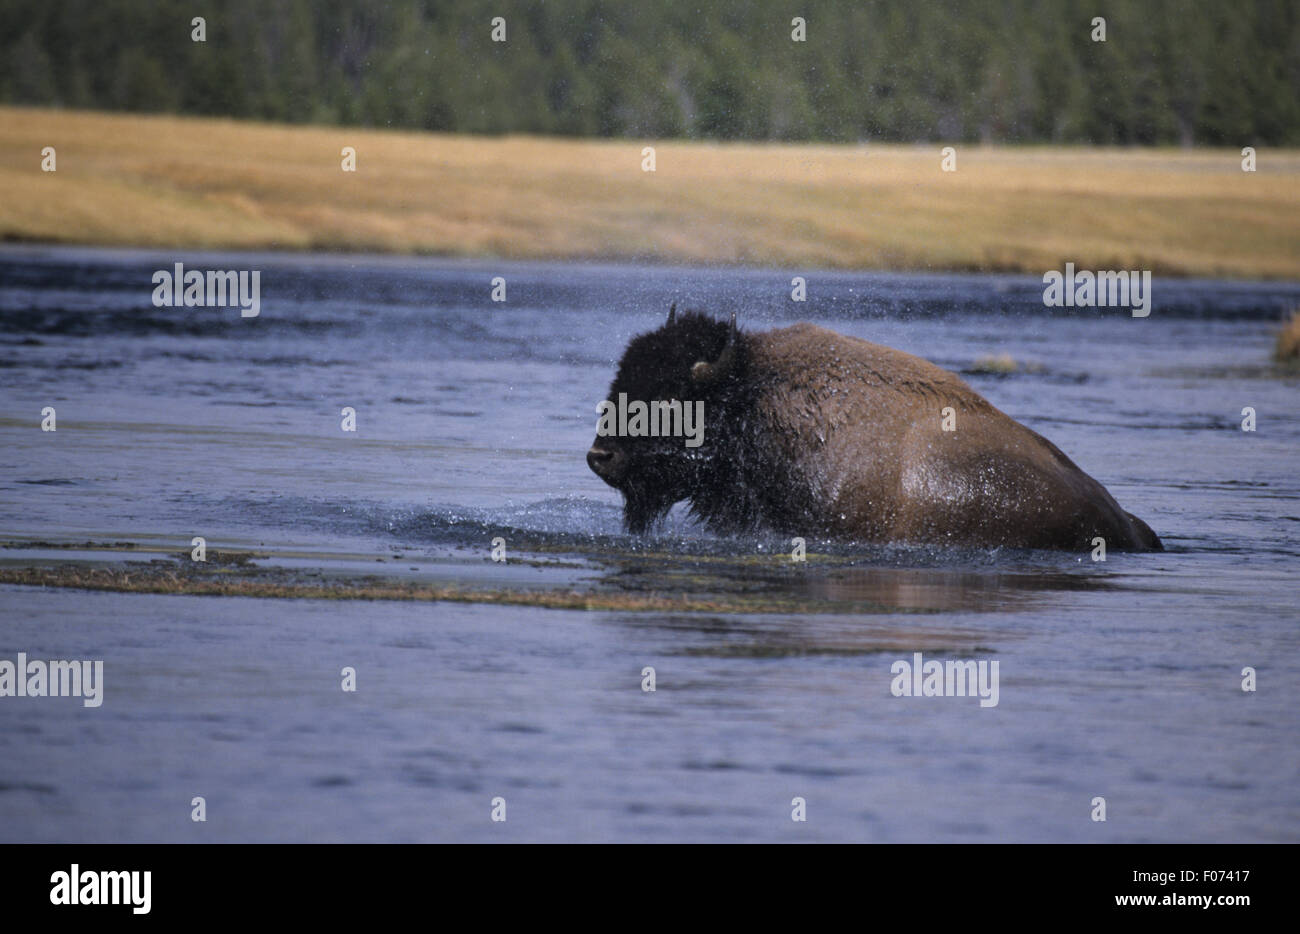 Bison taken in profile looking left climbing out of river soaking wet Stock Photo